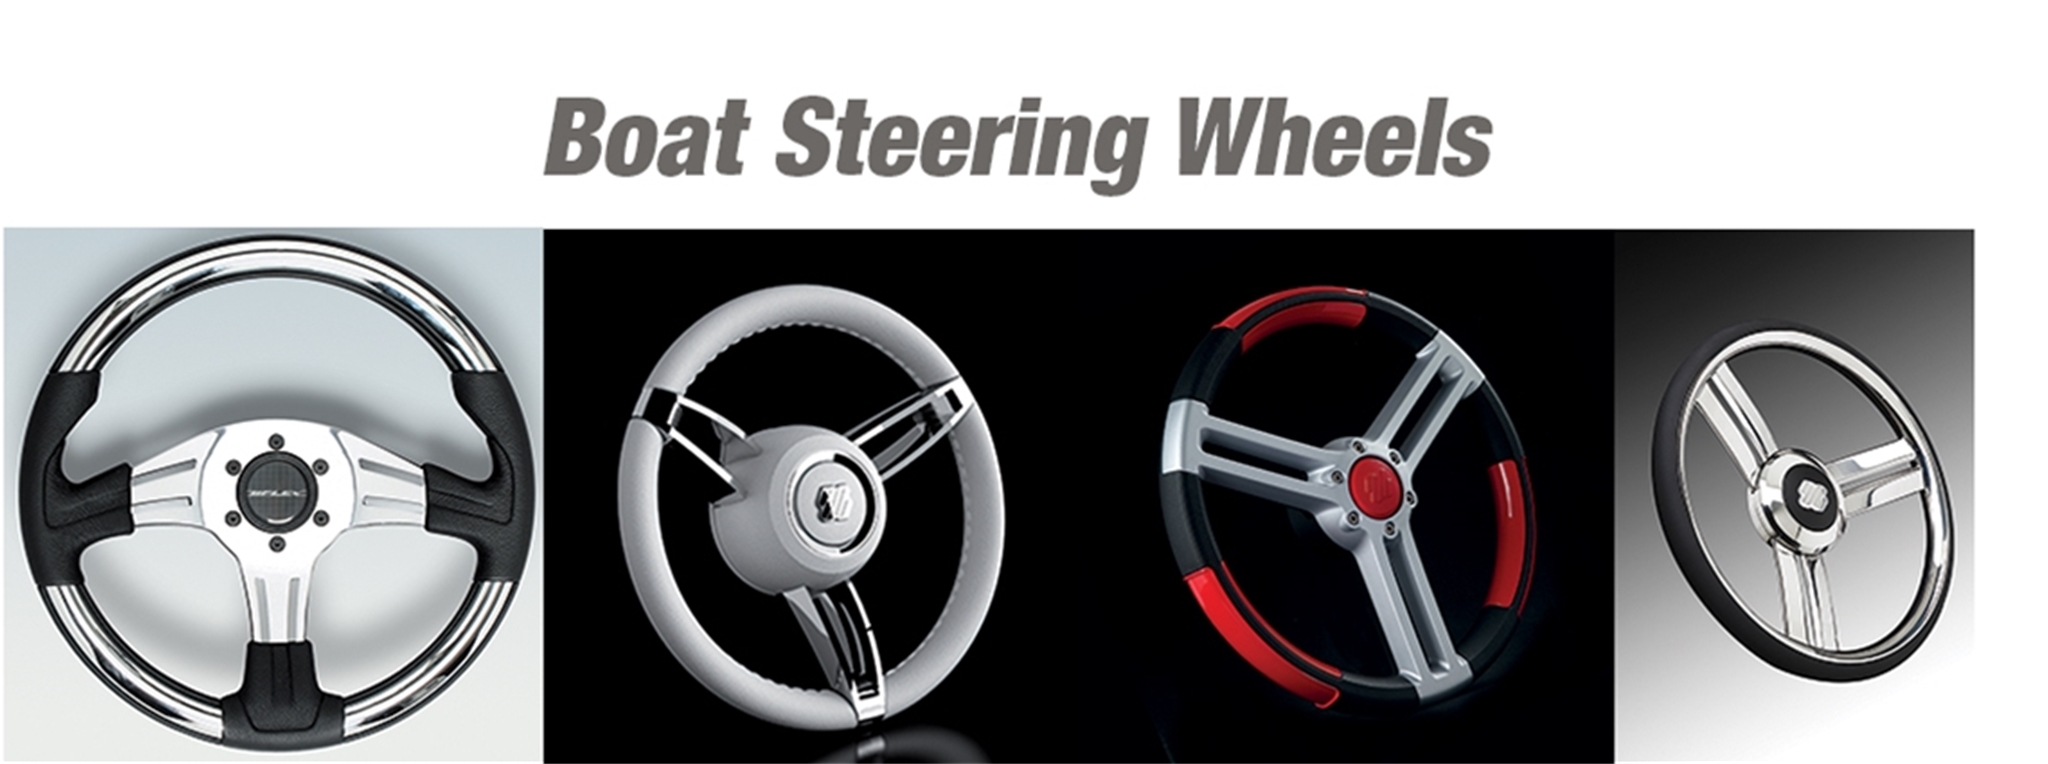 Boat Steering Wheels for all makes and models up to 70 feet